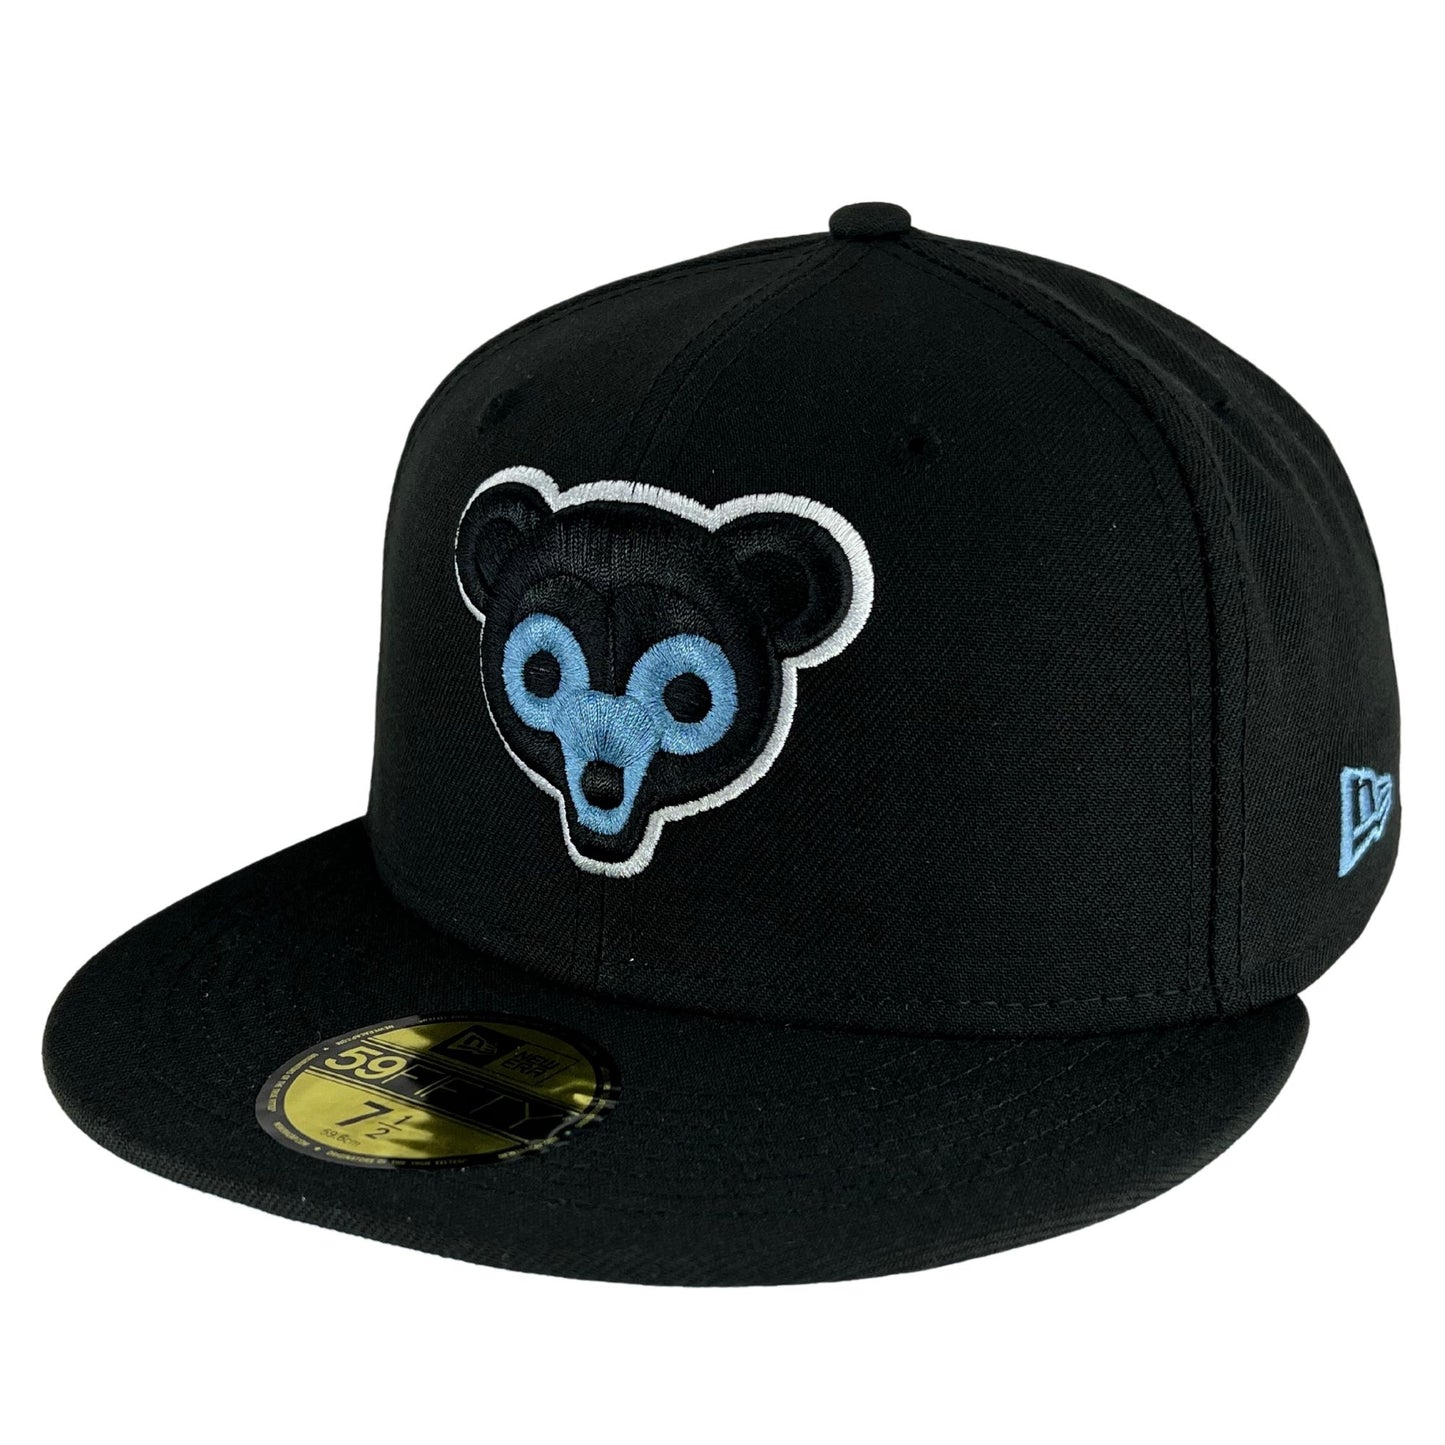 Chicago Cubs Black/Sky Blue 1962 ASG New Era 59FIFTY Fitted Hat